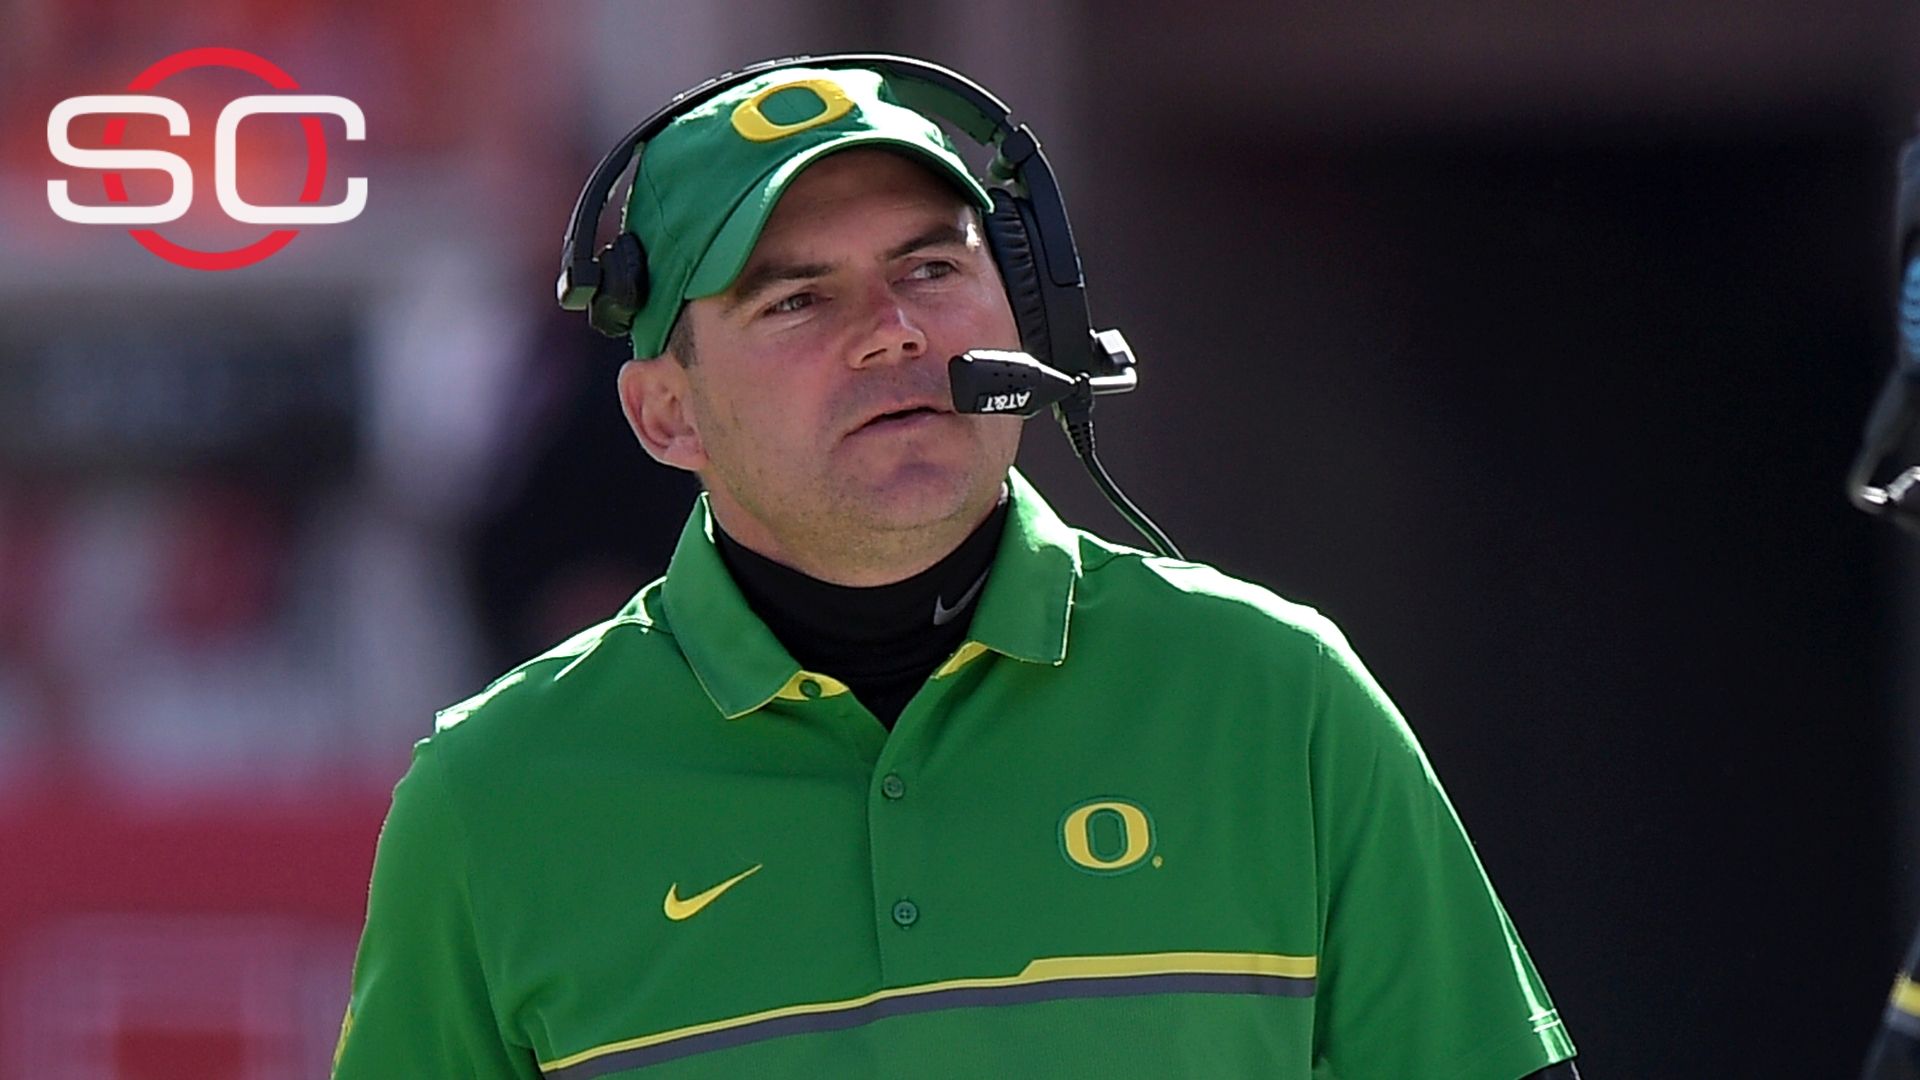 What led to Helfrich's dismissal?